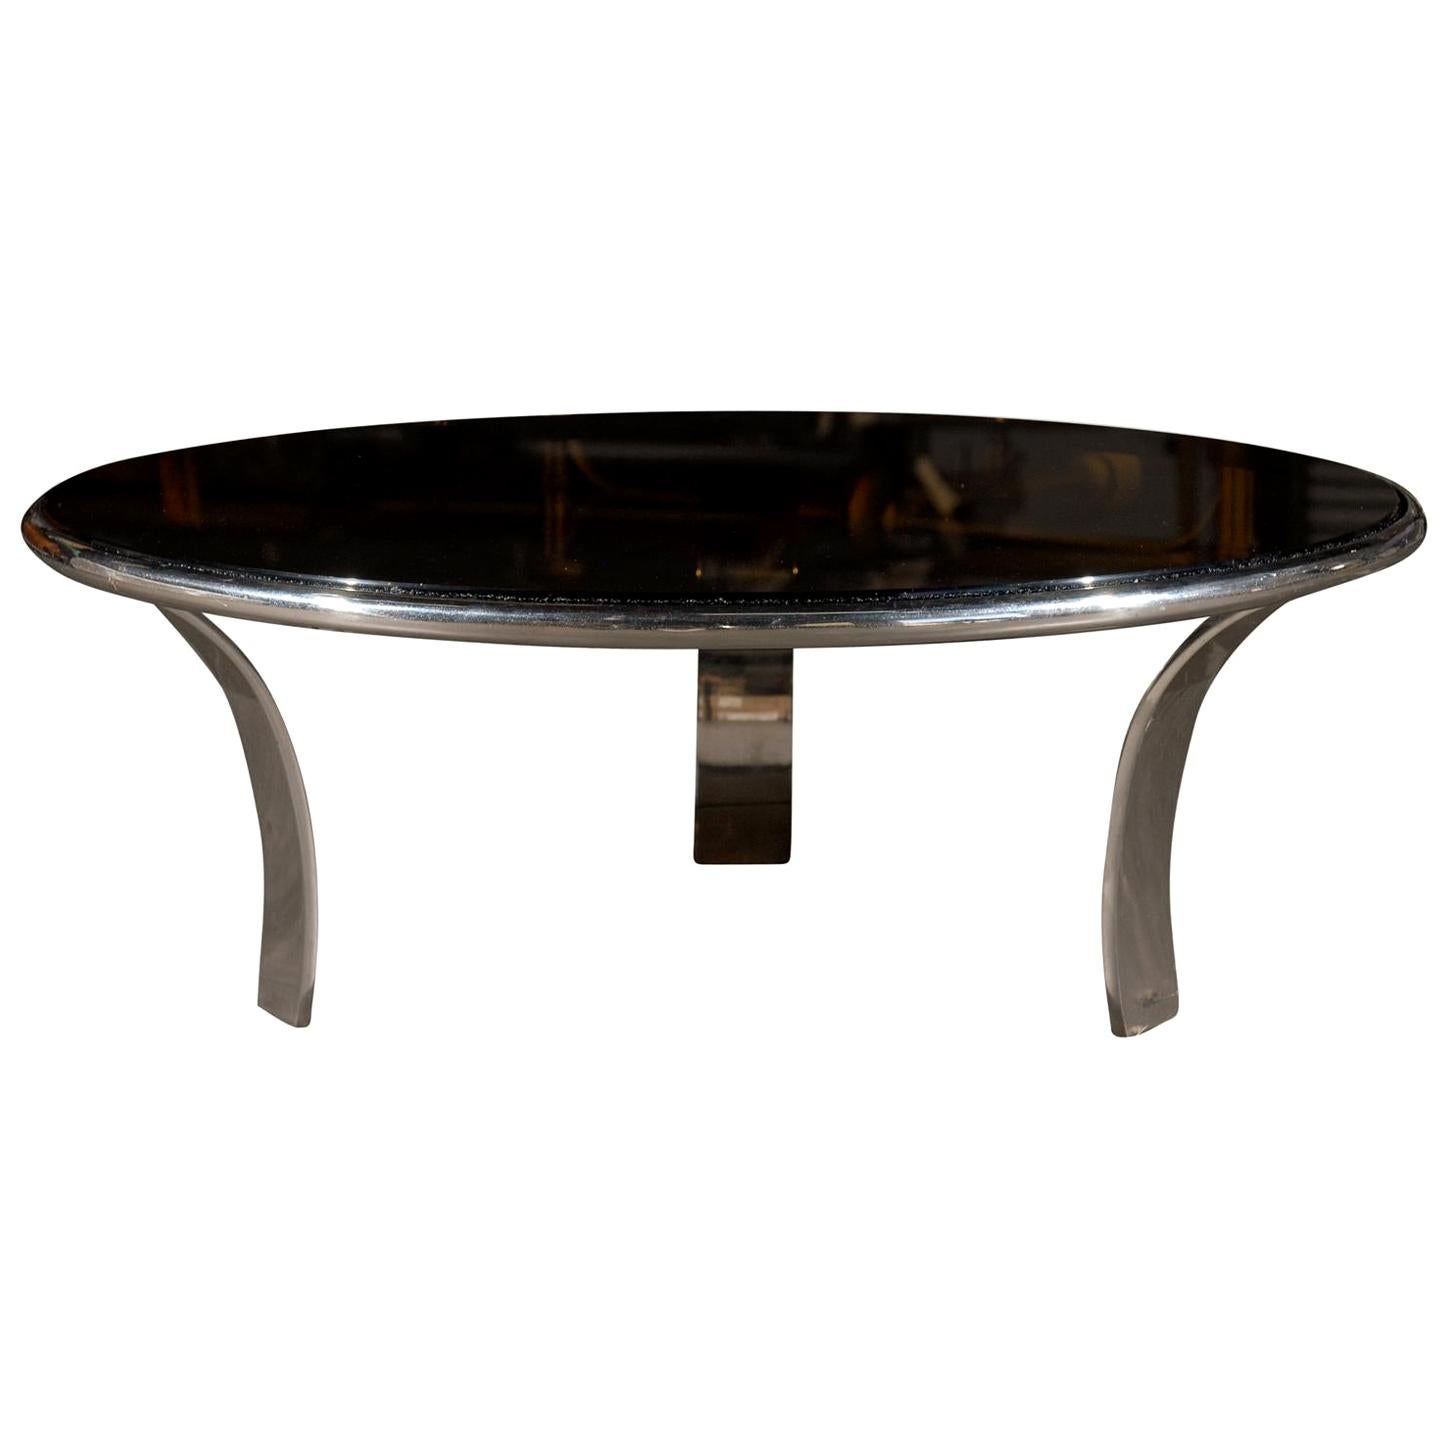 Mid-20th Century Round Chrome Coffee Table with Smoky Glass Top For Sale